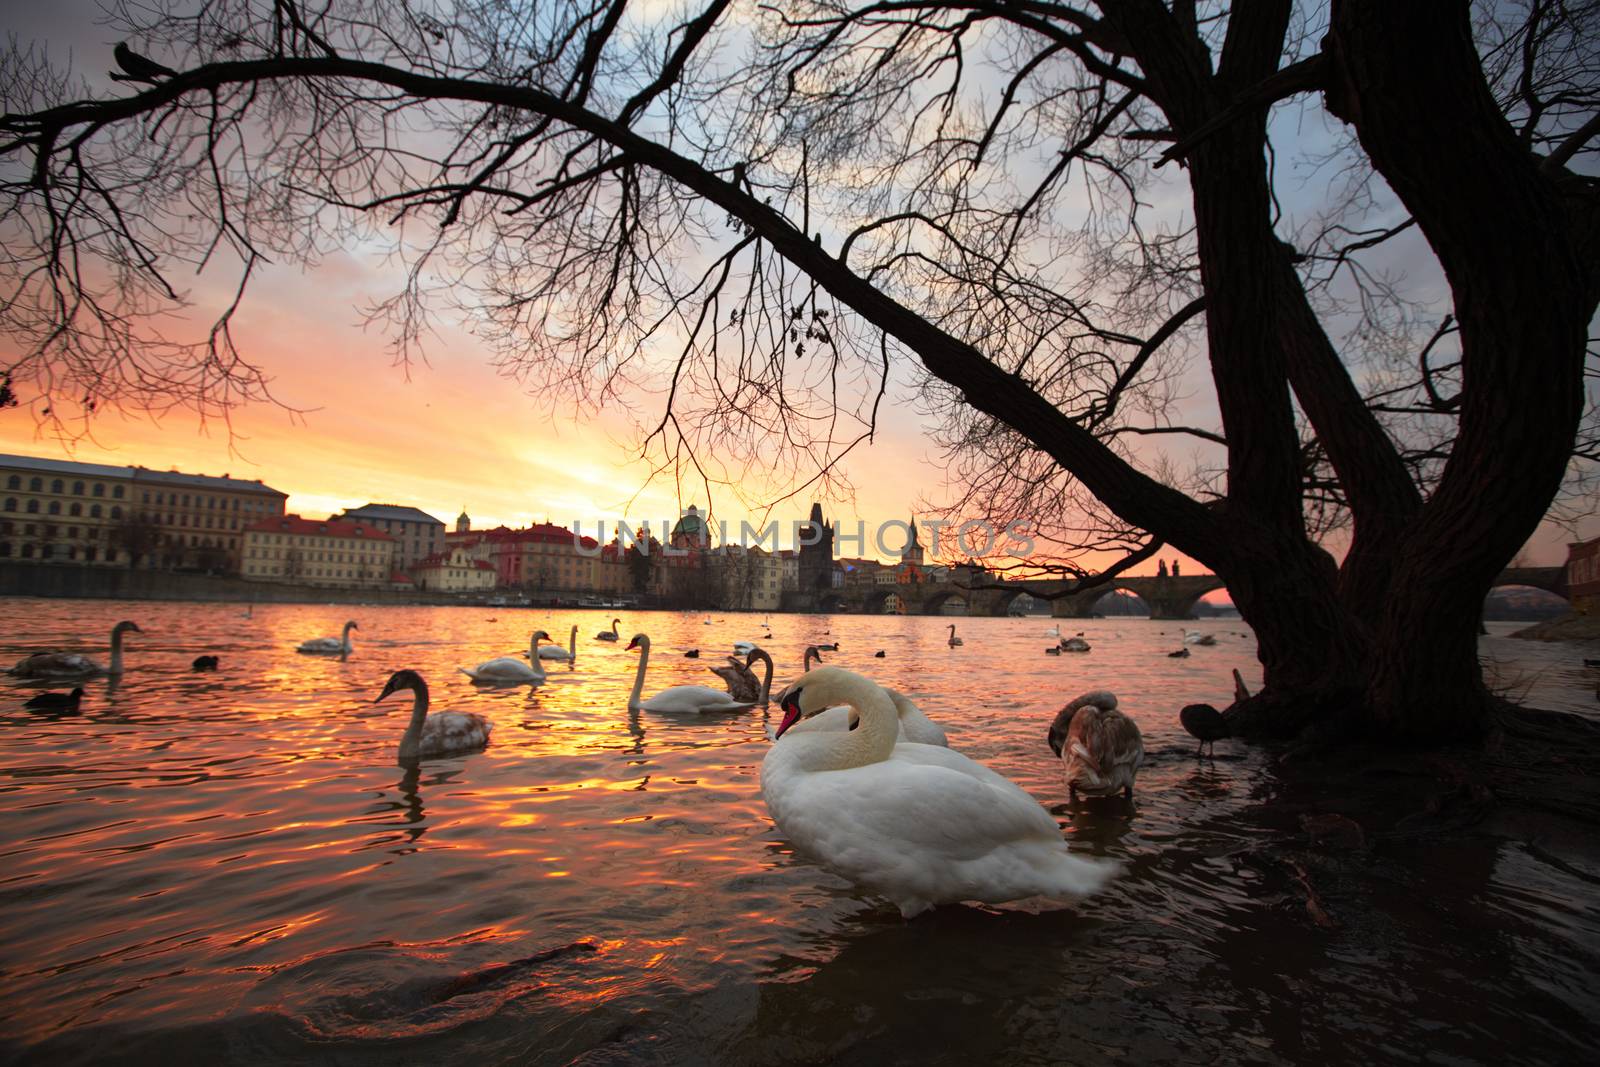 Swans in the city by Chalabala